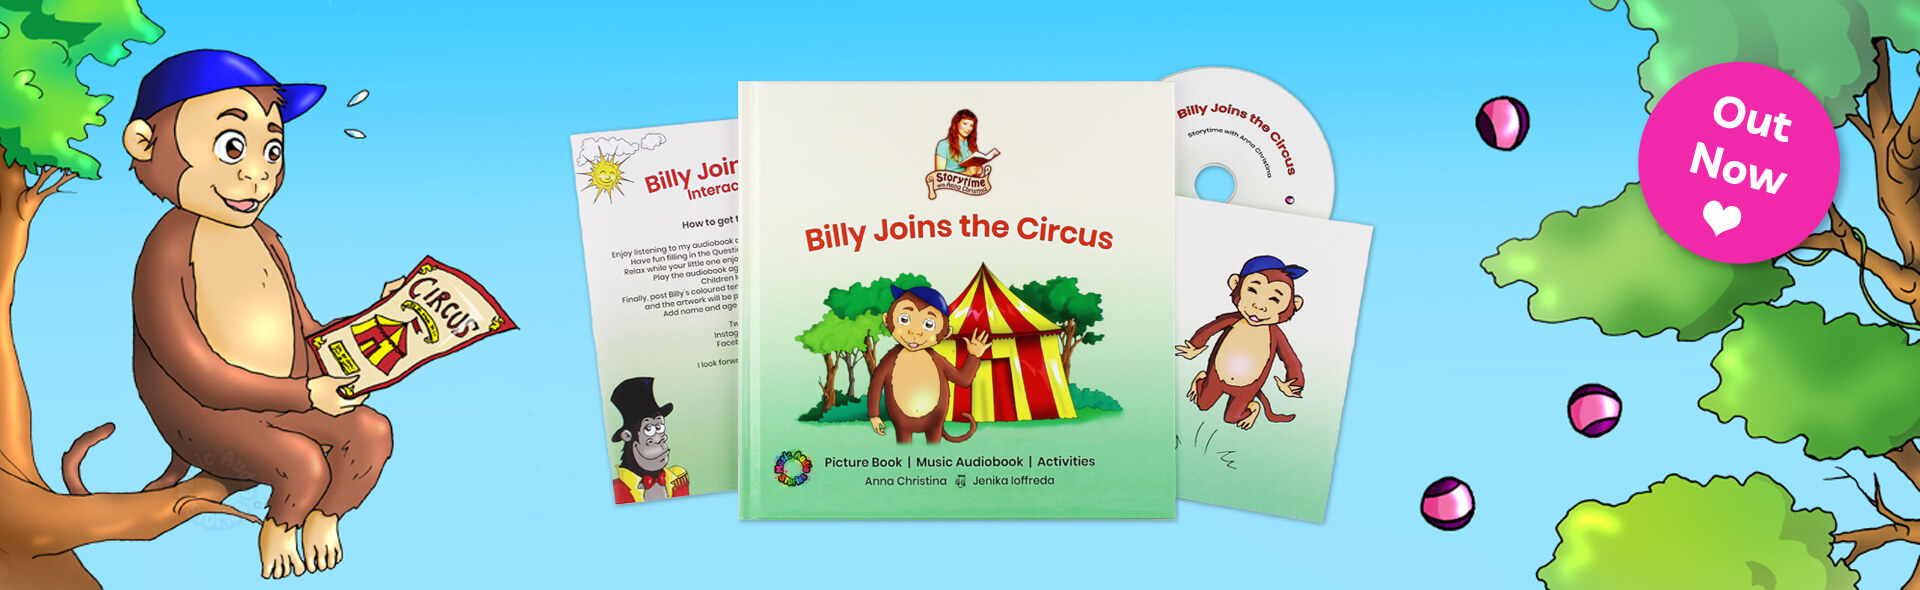 Billy Joins the Circus picture book